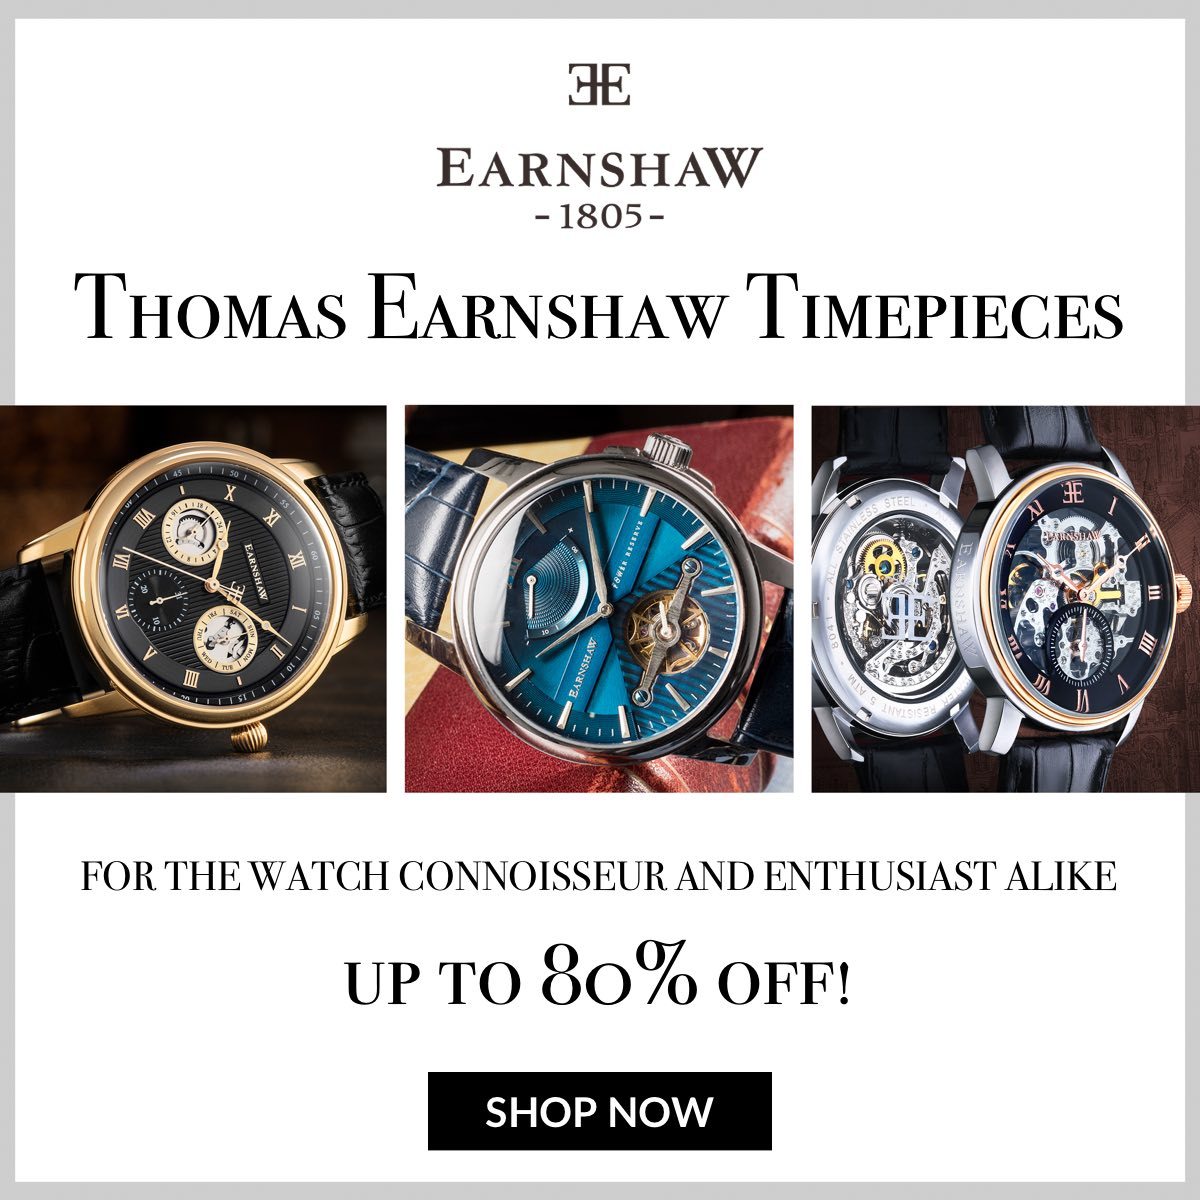 Thomas Earnshaw Timepieces for the watch connoisseur and enthusiast alike Up to 80% off!